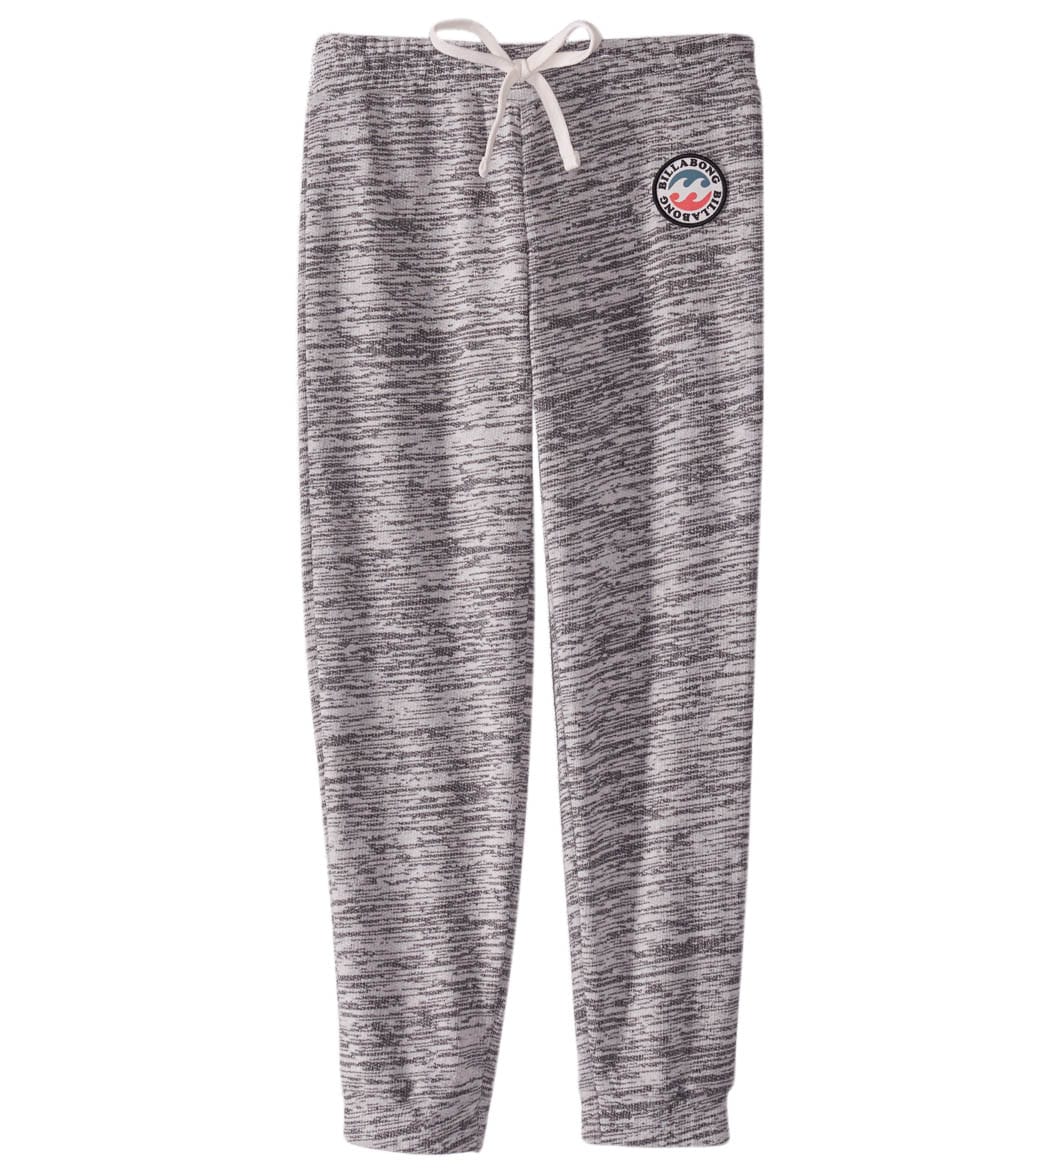 Billabong Girls' So Low Fleece Skinny Pants - Ice Athletic Gr Xx-Small Cotton/Polyester - Swimoutlet.com